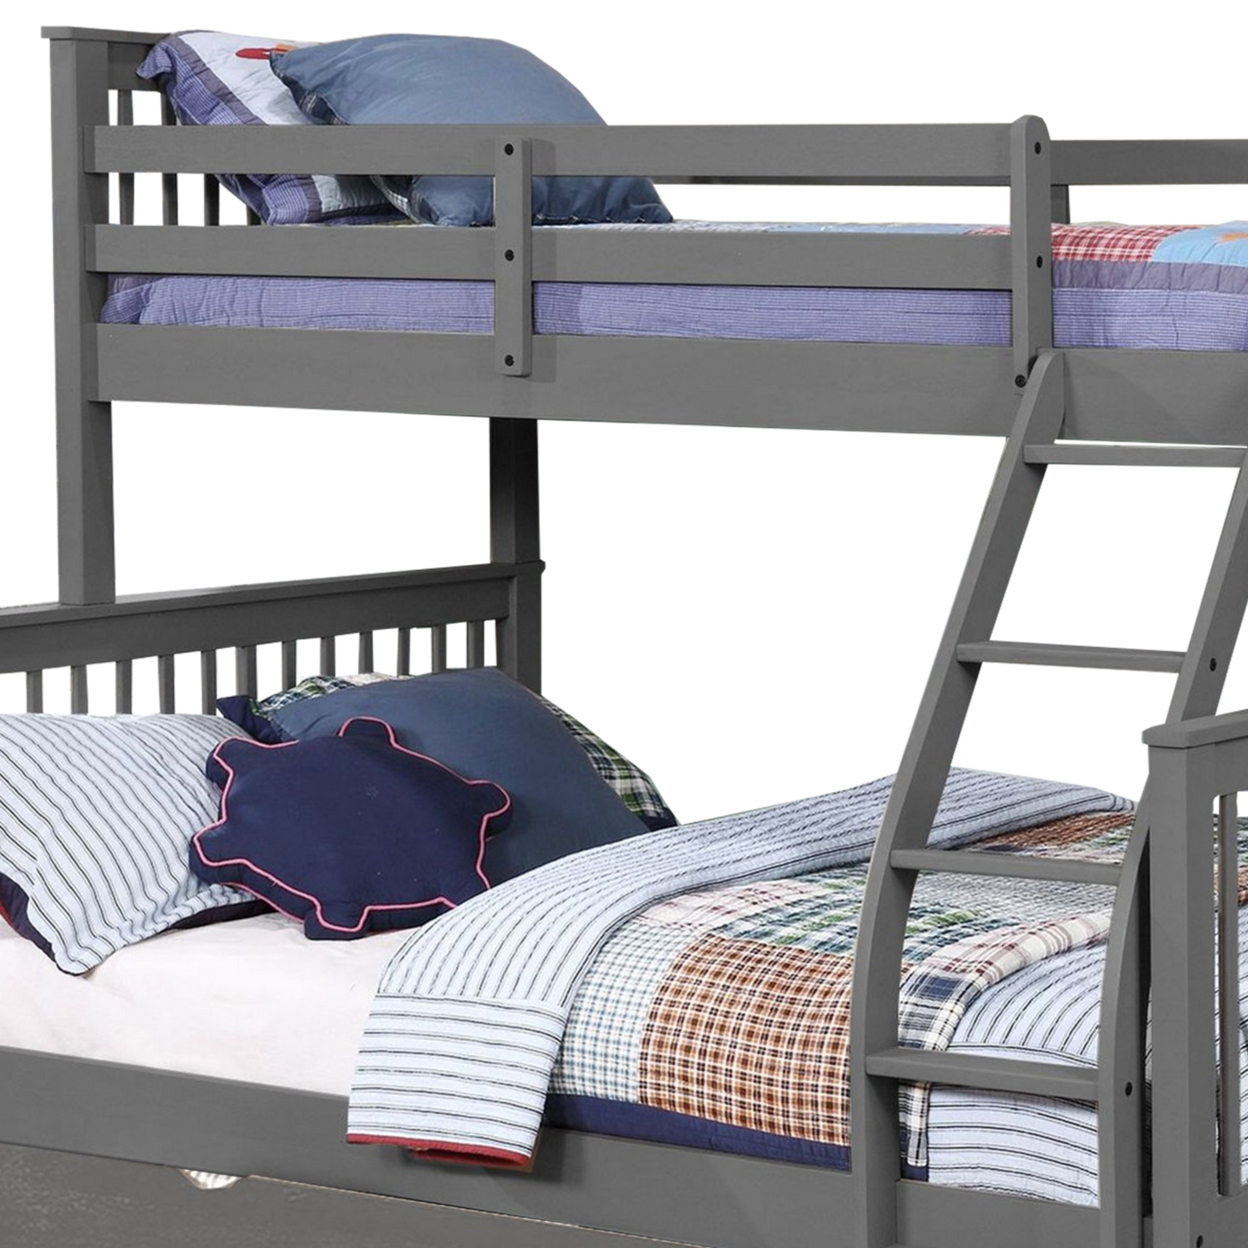 Mission Style Wooden Twin Over Full Bunk Bed With Attached Trundle, Gray- Saltoro Sherpi